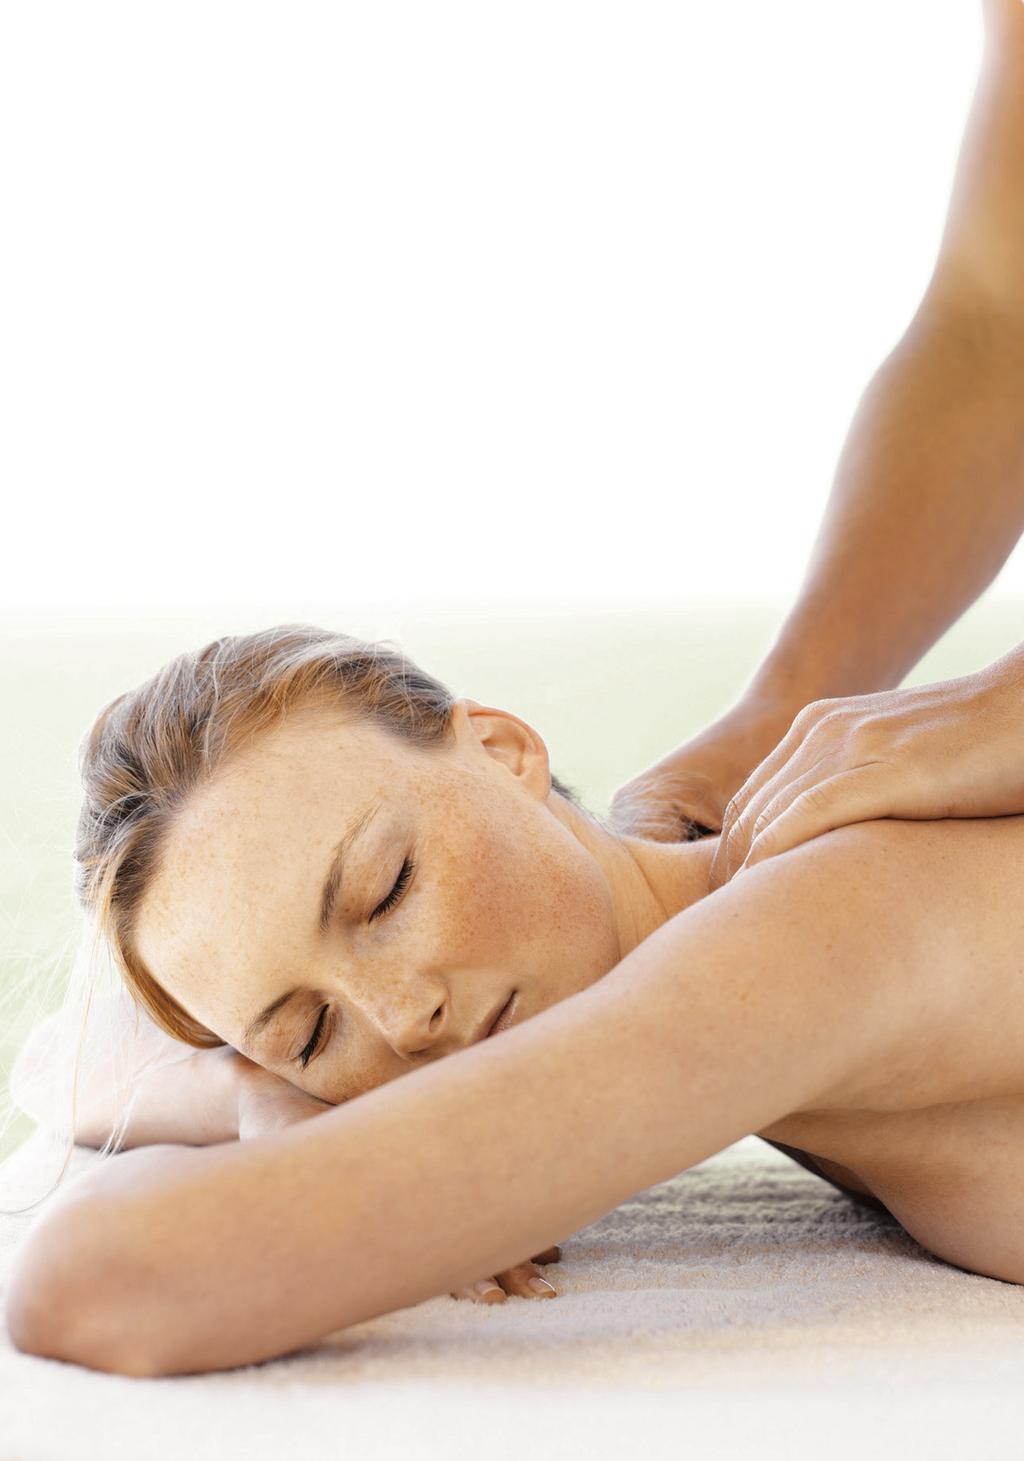 ESPA BODY TREATMENTS WE OFFER A HUGE RANGE OF SOLUTION LED ESPA BODY TREATMENTS AND MASSAGES, EACH ONE DESIGNED AND